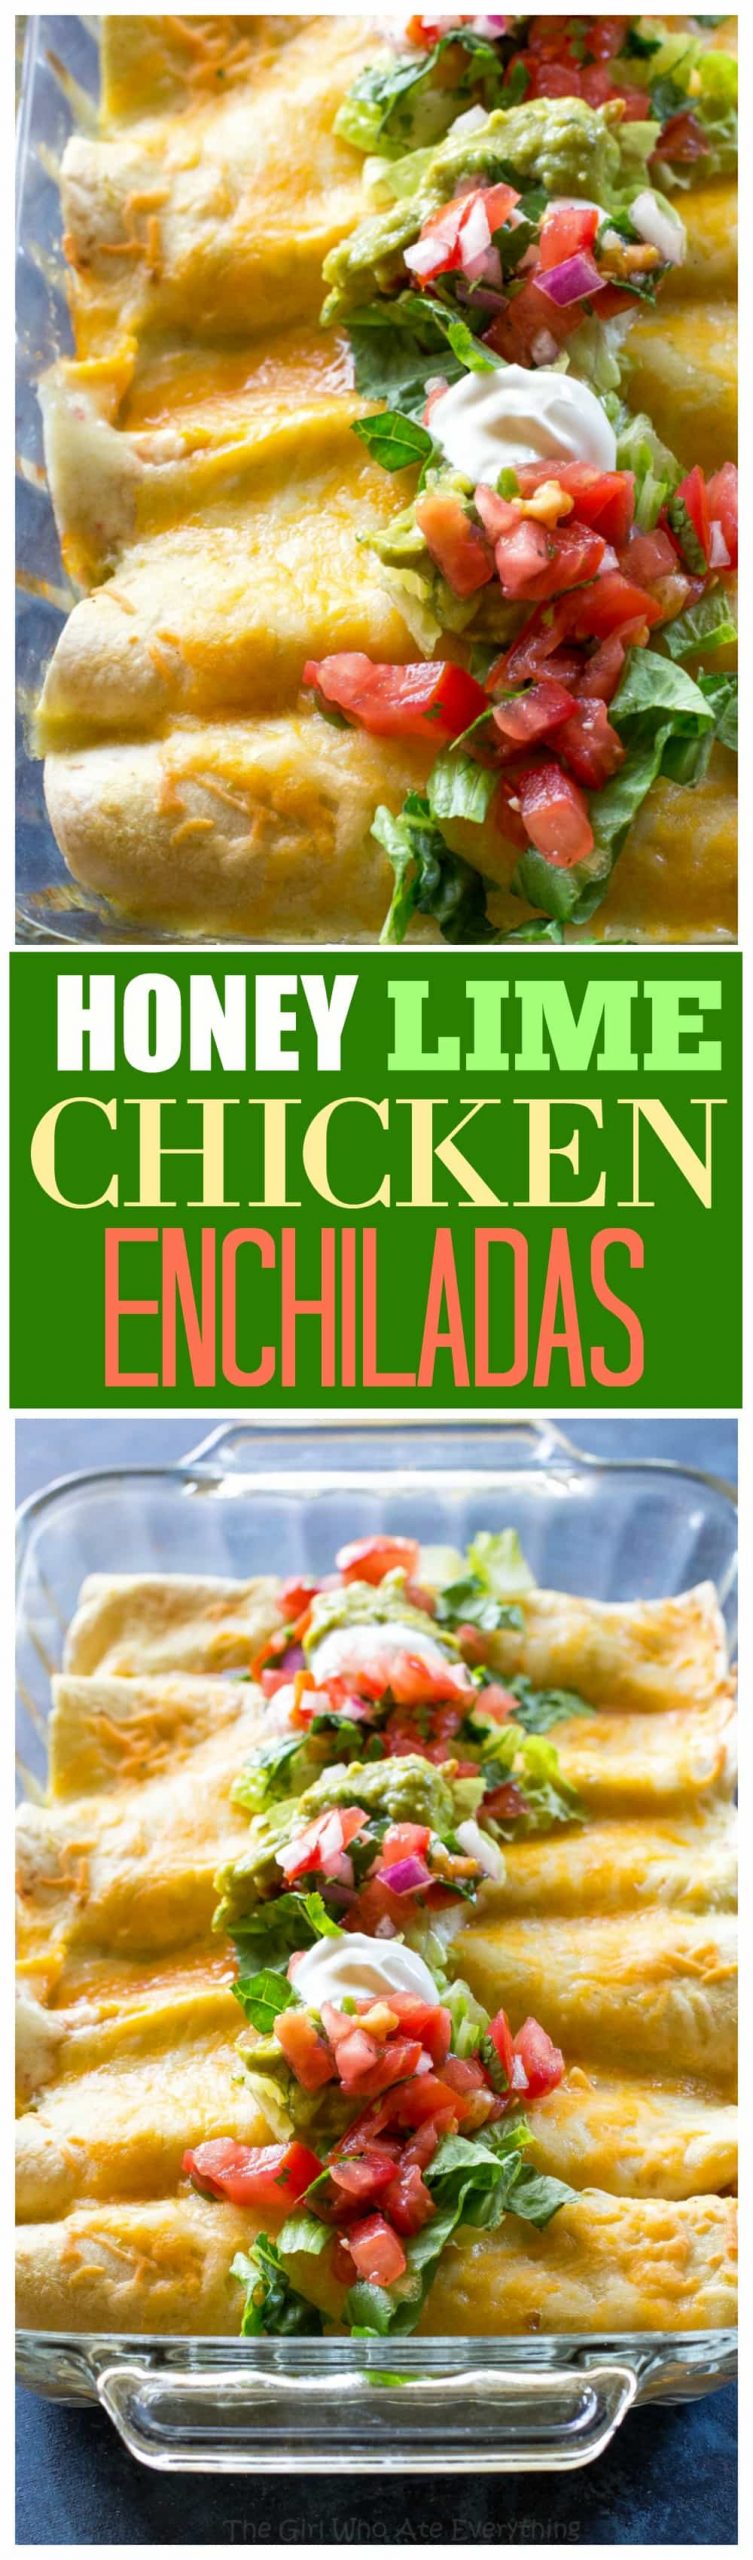 Honey Lime Chicken Enchiladas - my go-to easy Mexican dinner for company that is freezer friendly. #mexican #dinner #recipe #honey #lime #enchiladas #freezerfriendly